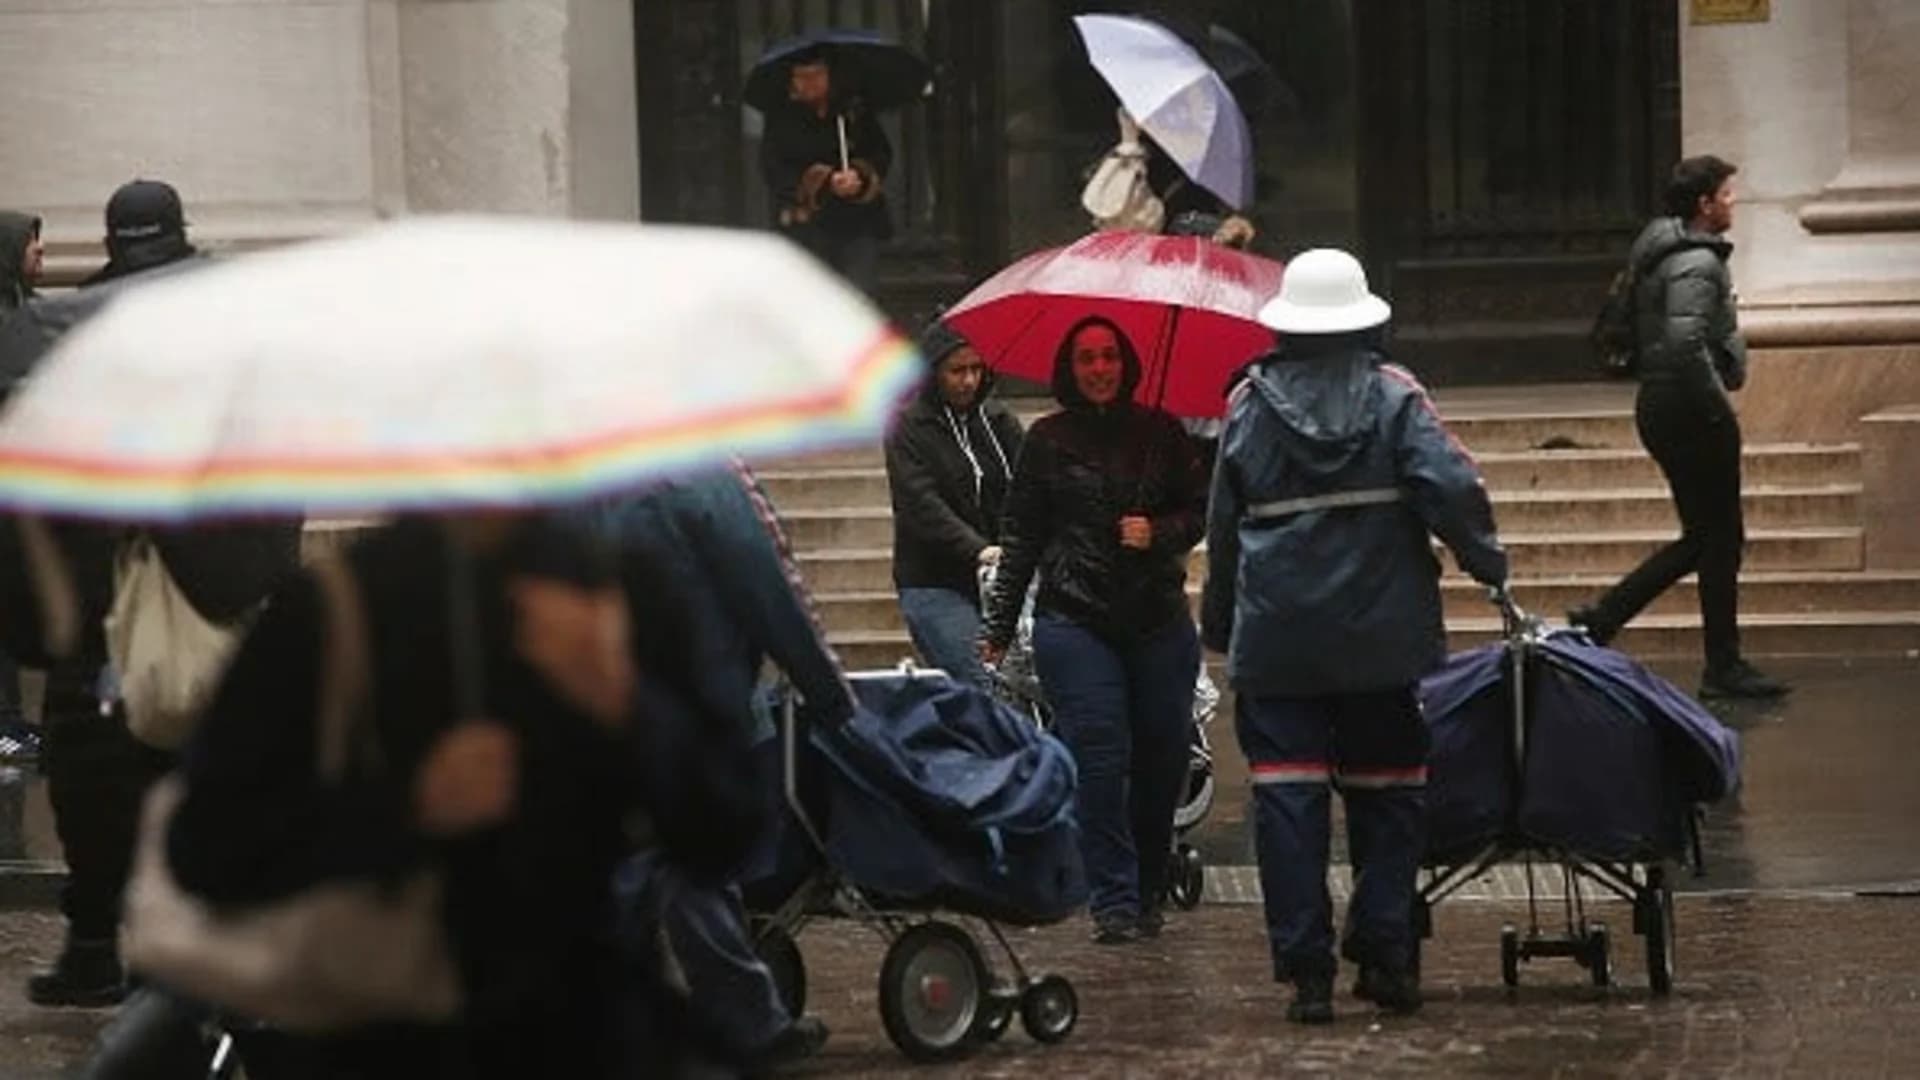 Weather Update: 1-2 inches of heavy rain expected in the Bronx